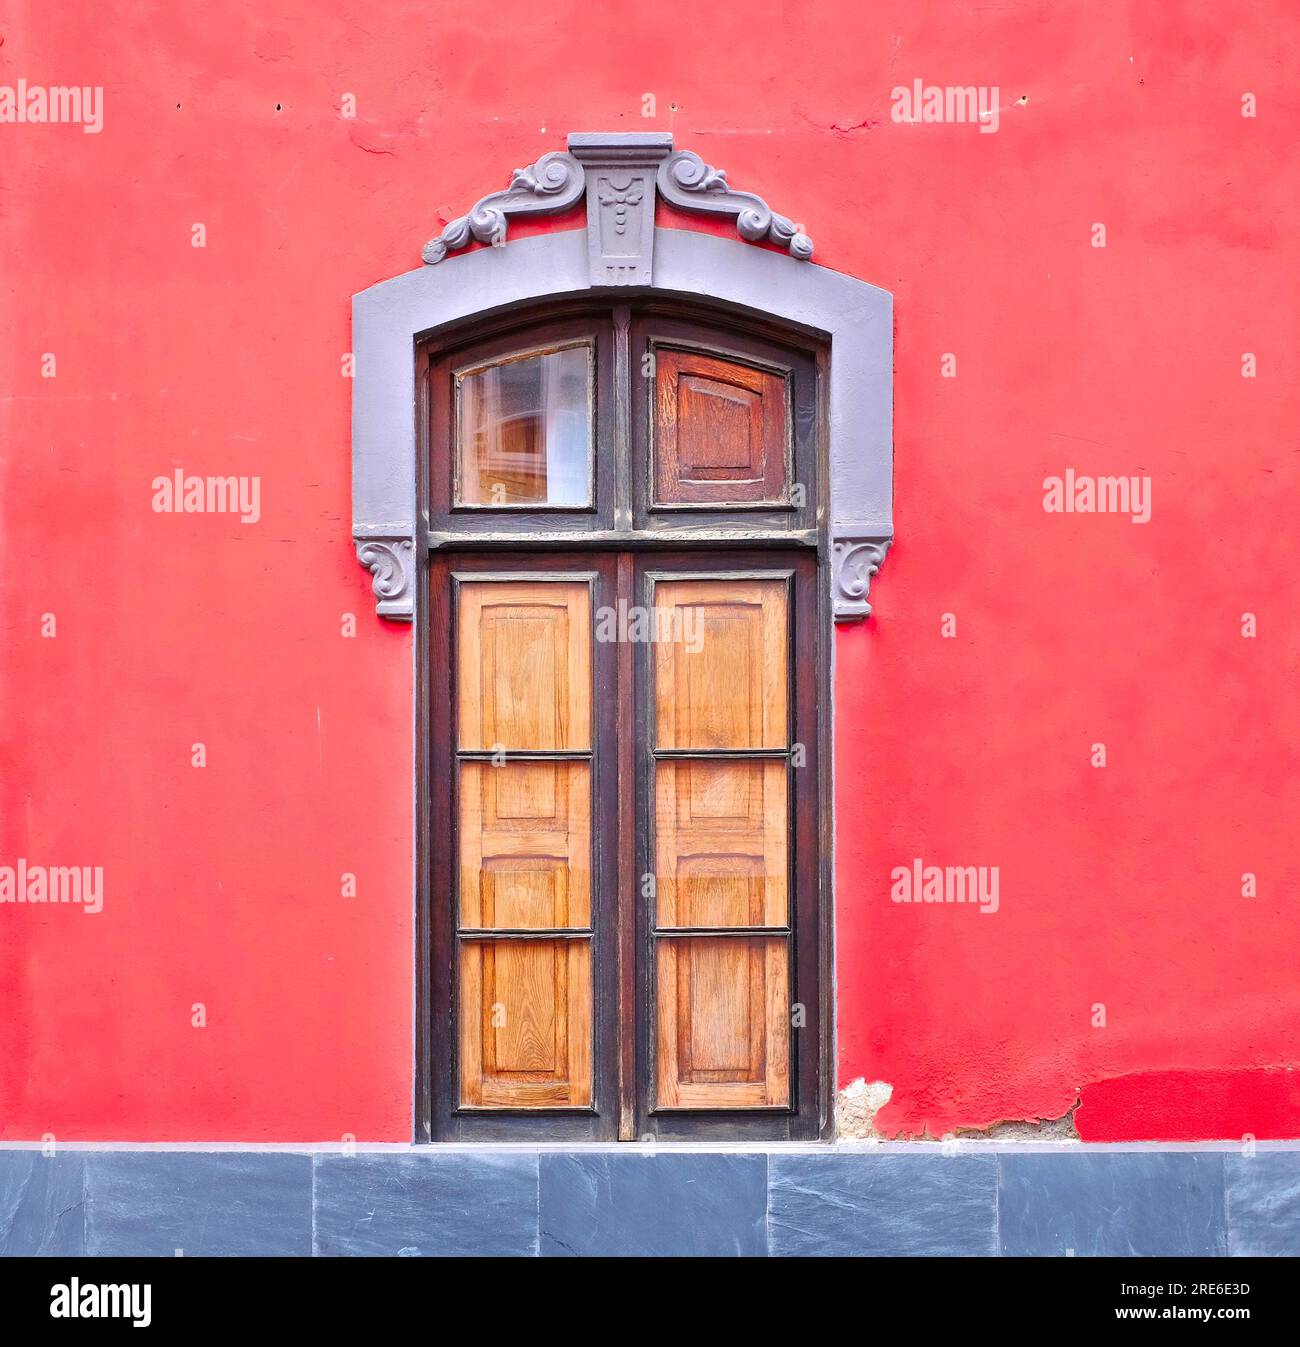 A joyful wooden window frame in a bright red wall, a lovely example of classic European style architecture. Stock Photo